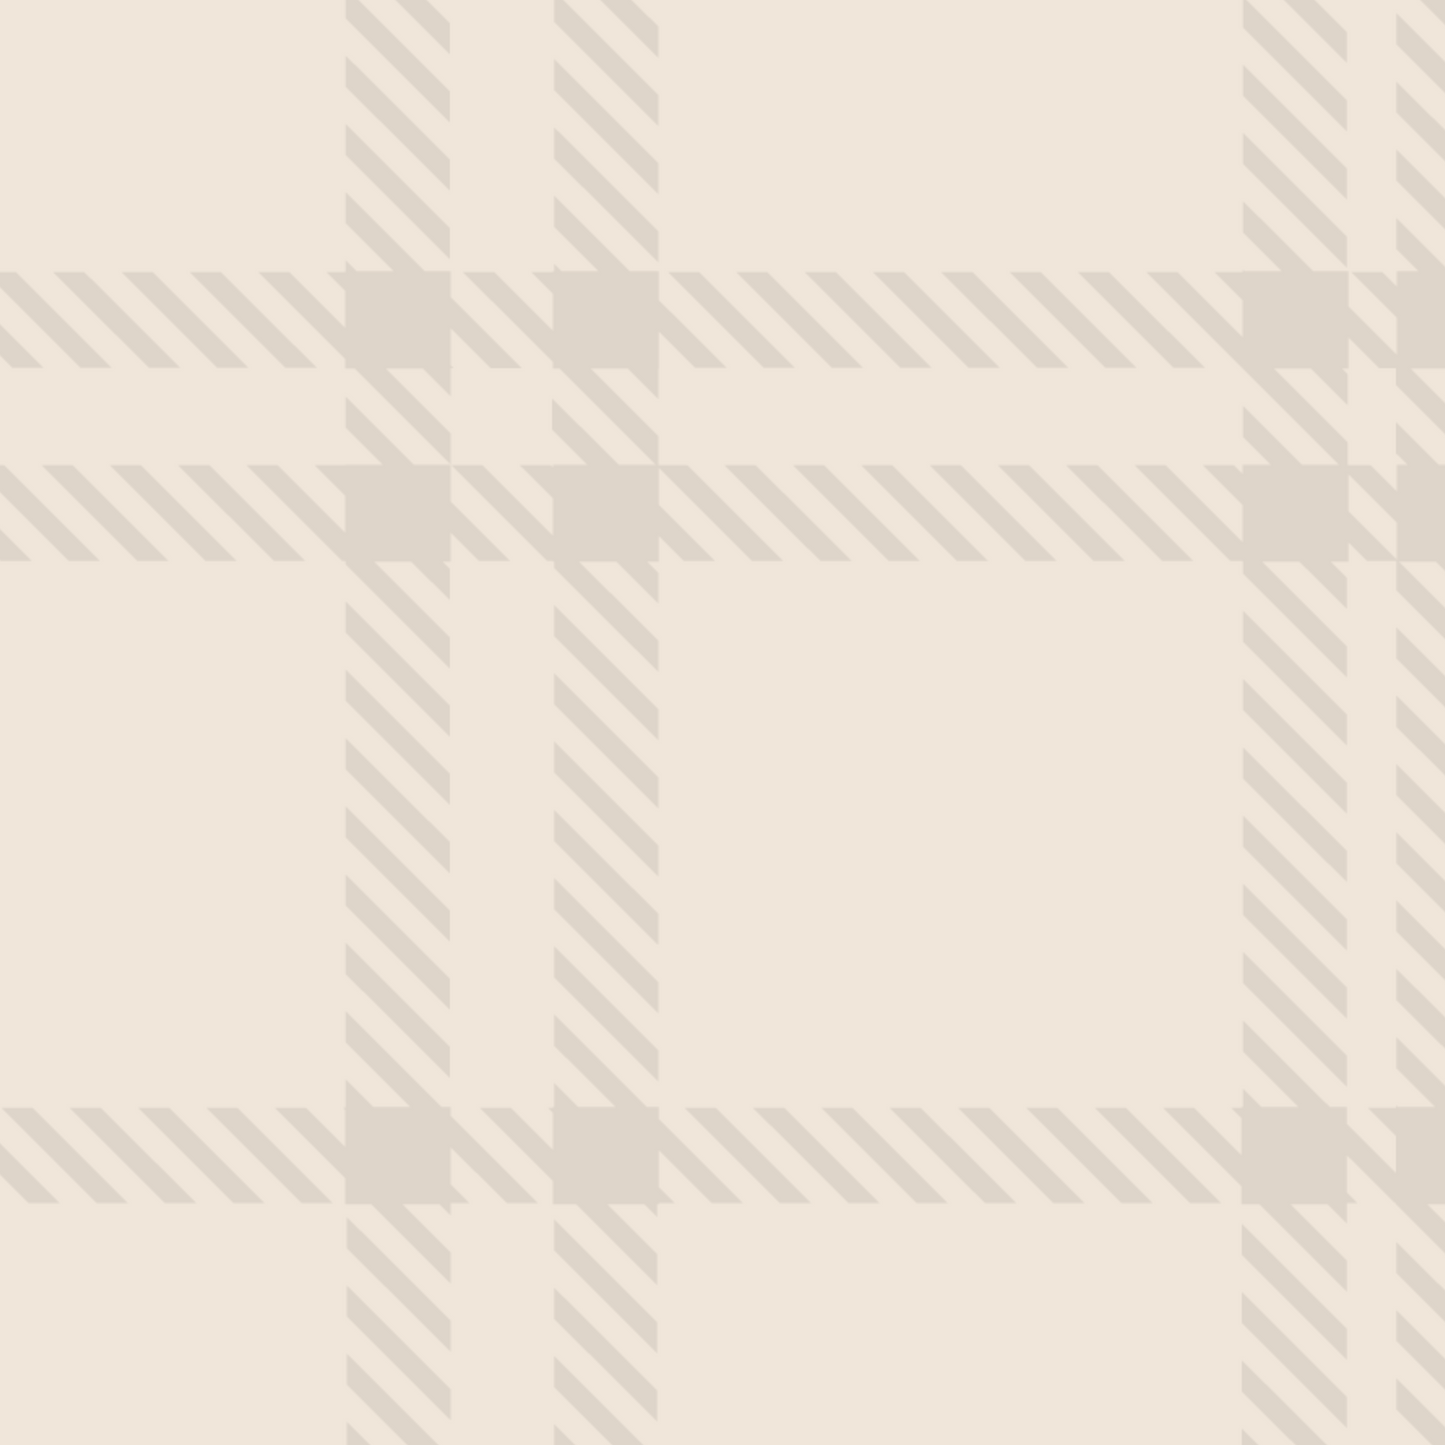 Classic Plaid Wallpaper - Greige and Tan